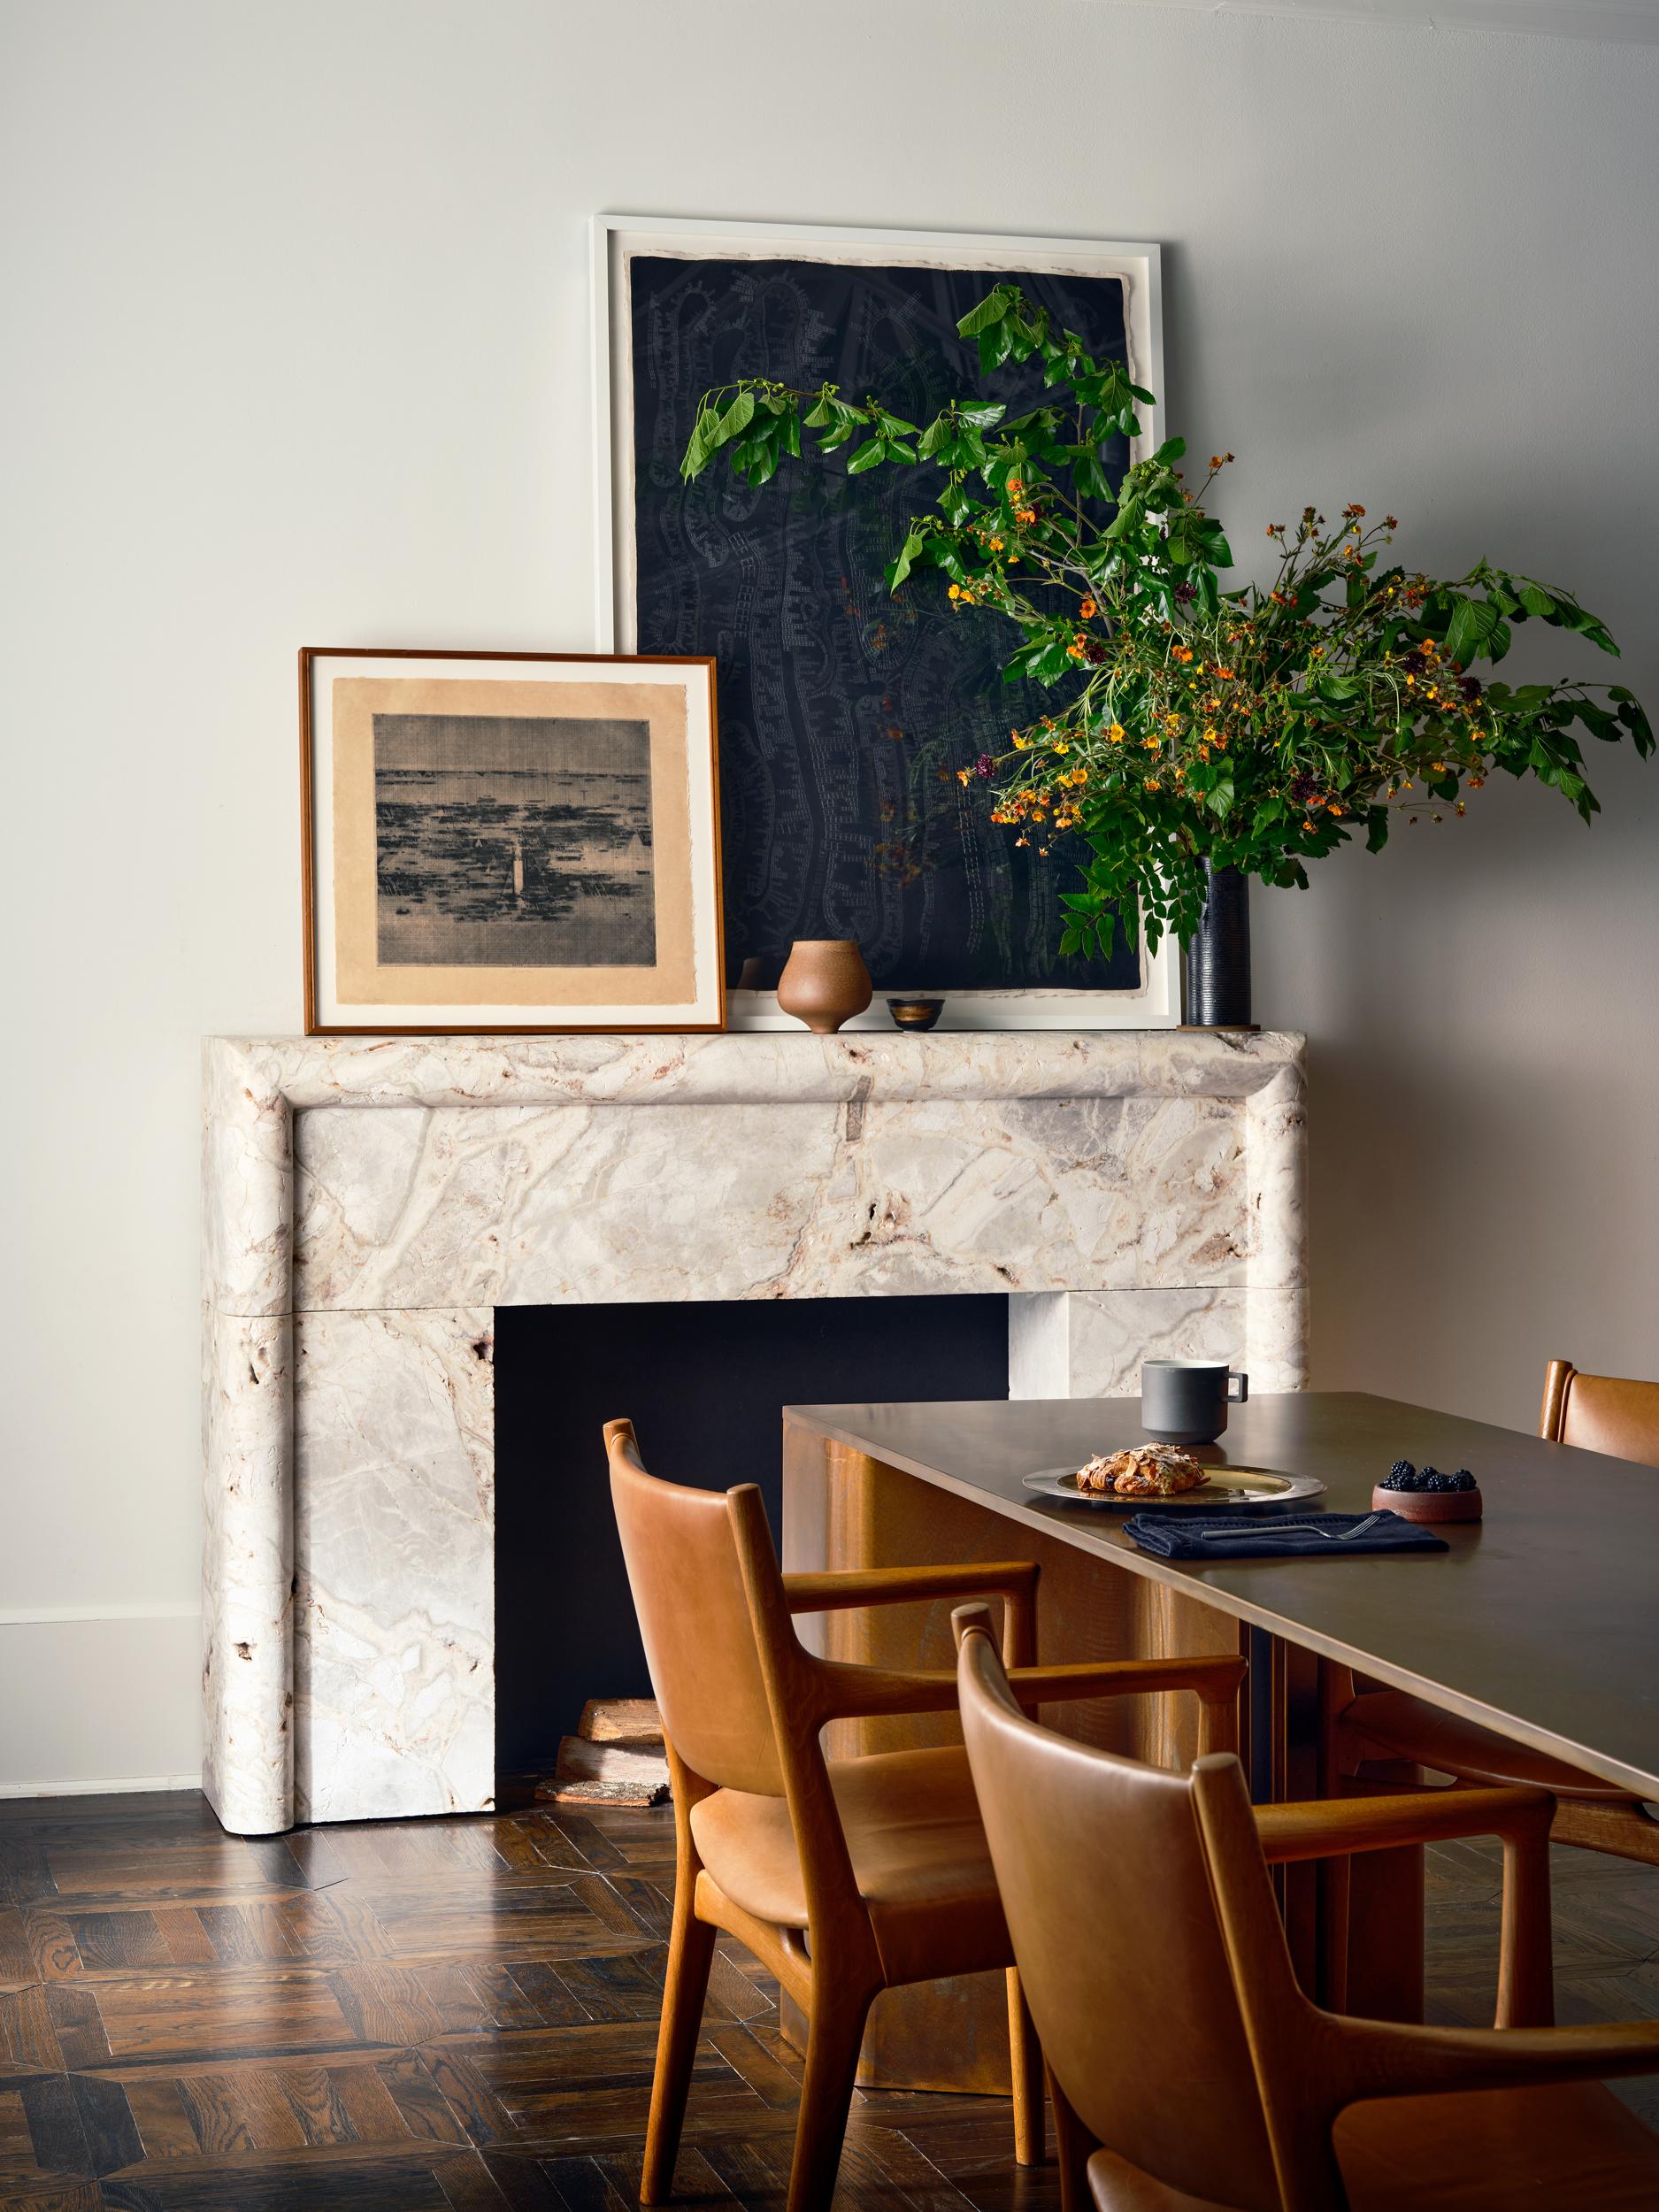 Designed and engineered by the Chad Dorsey Design studio, Strike is an original collection of fireplaces in luxurious finishes that create a compelling focal point to any bespoke living space. 

The Sea Ranch bespoke fireplace adds a small touch of